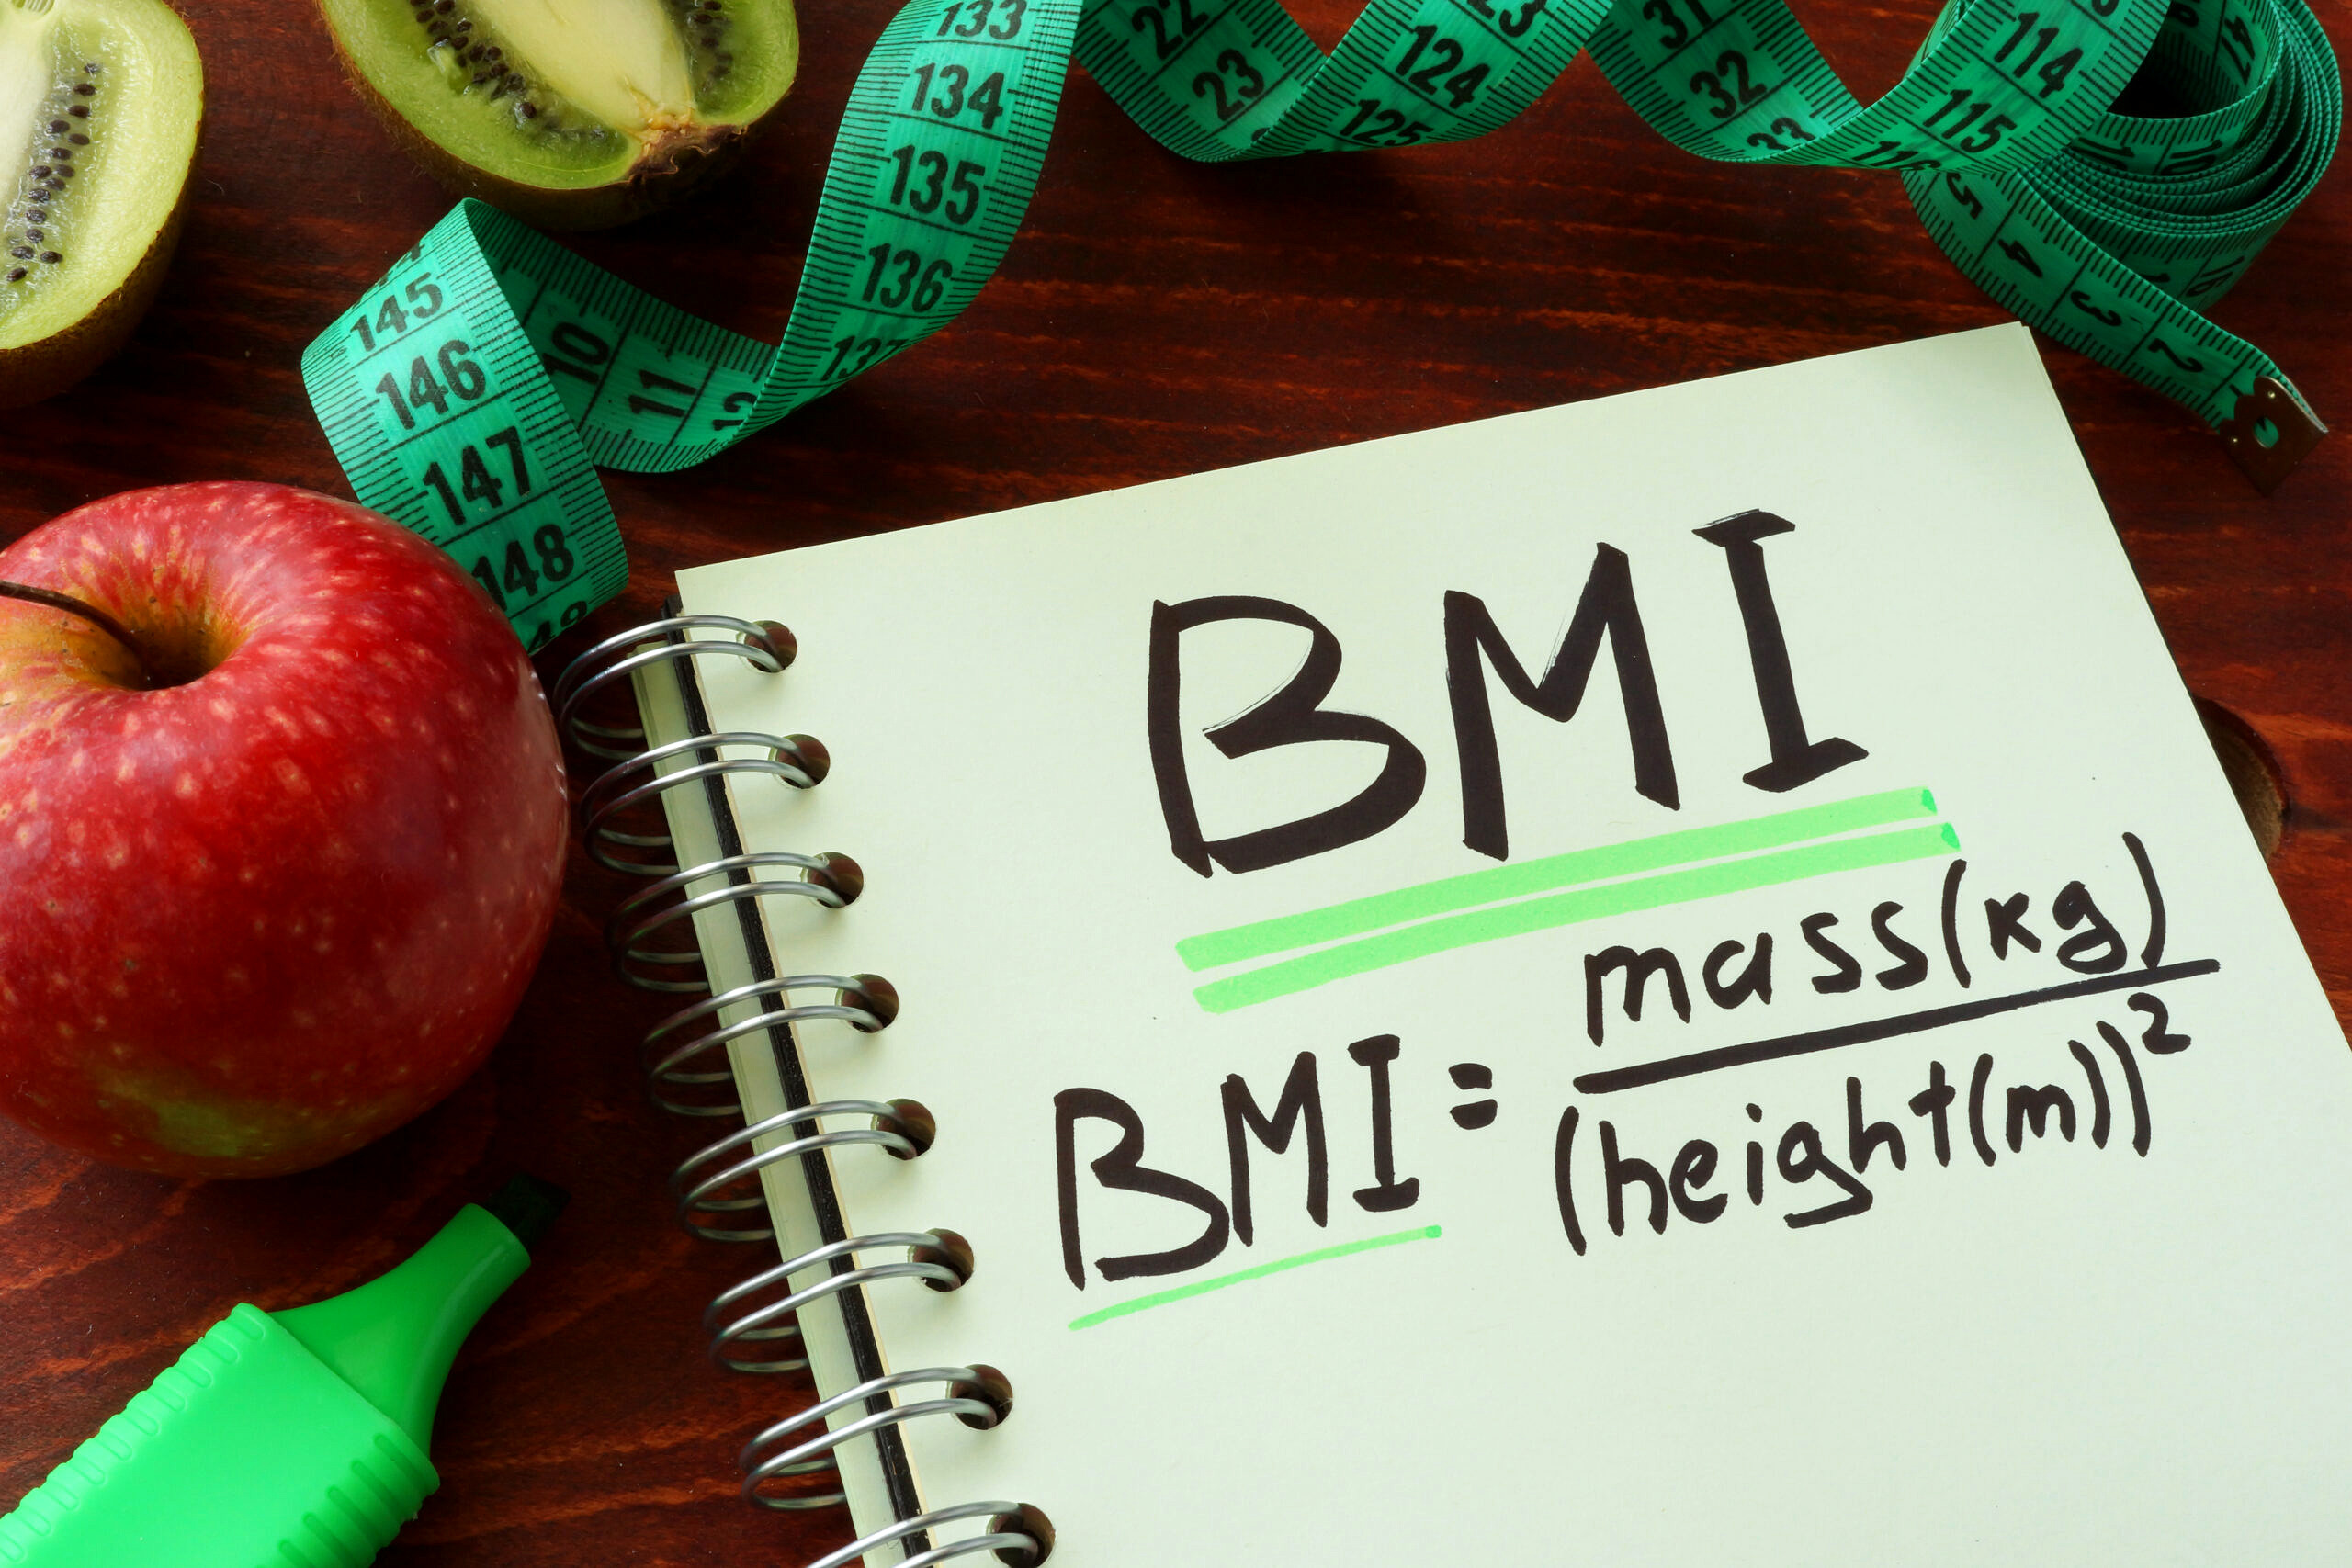 BMI calculations, weight loss, obesity